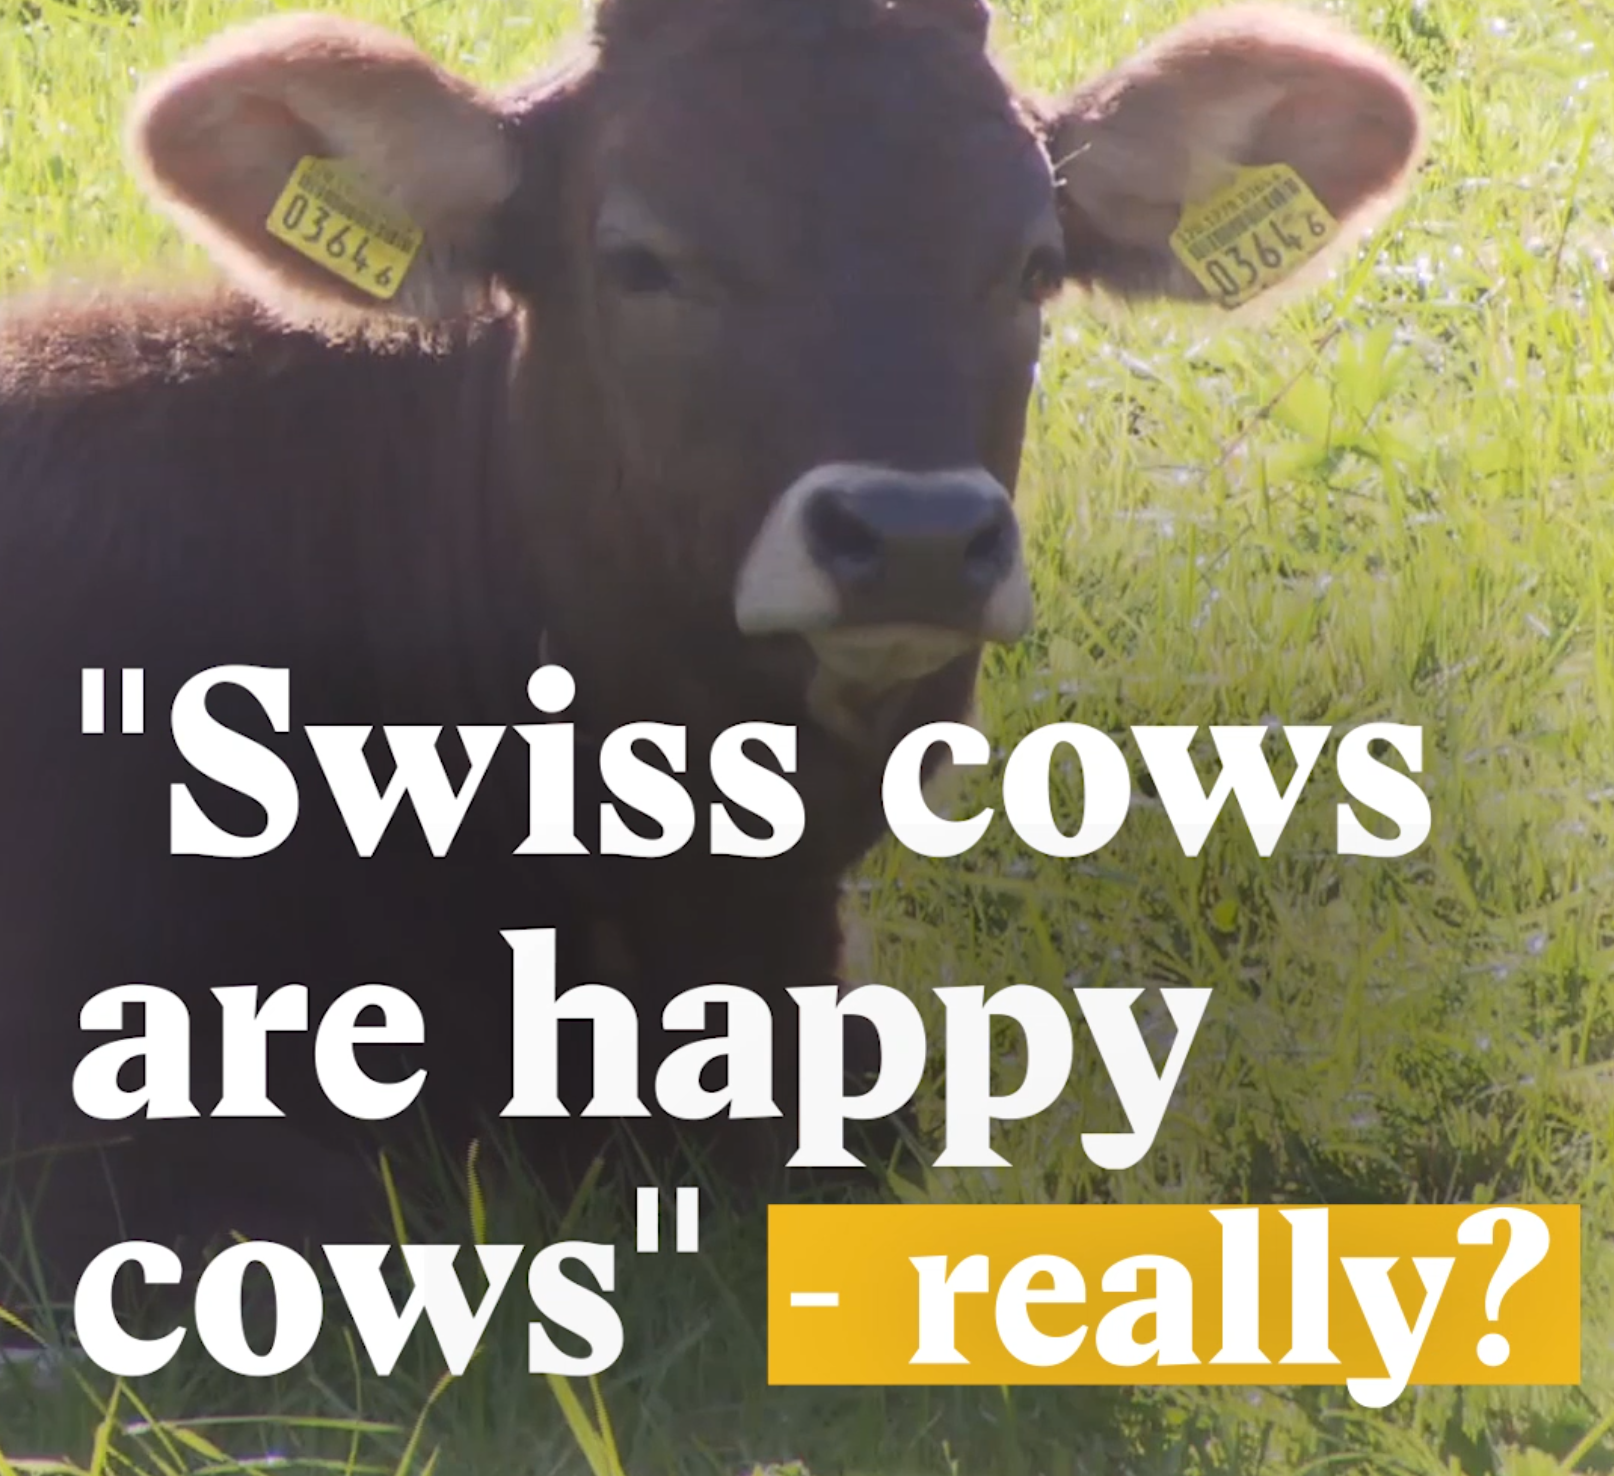 A cover image for a Nouvo video about Swiss cows happiness.